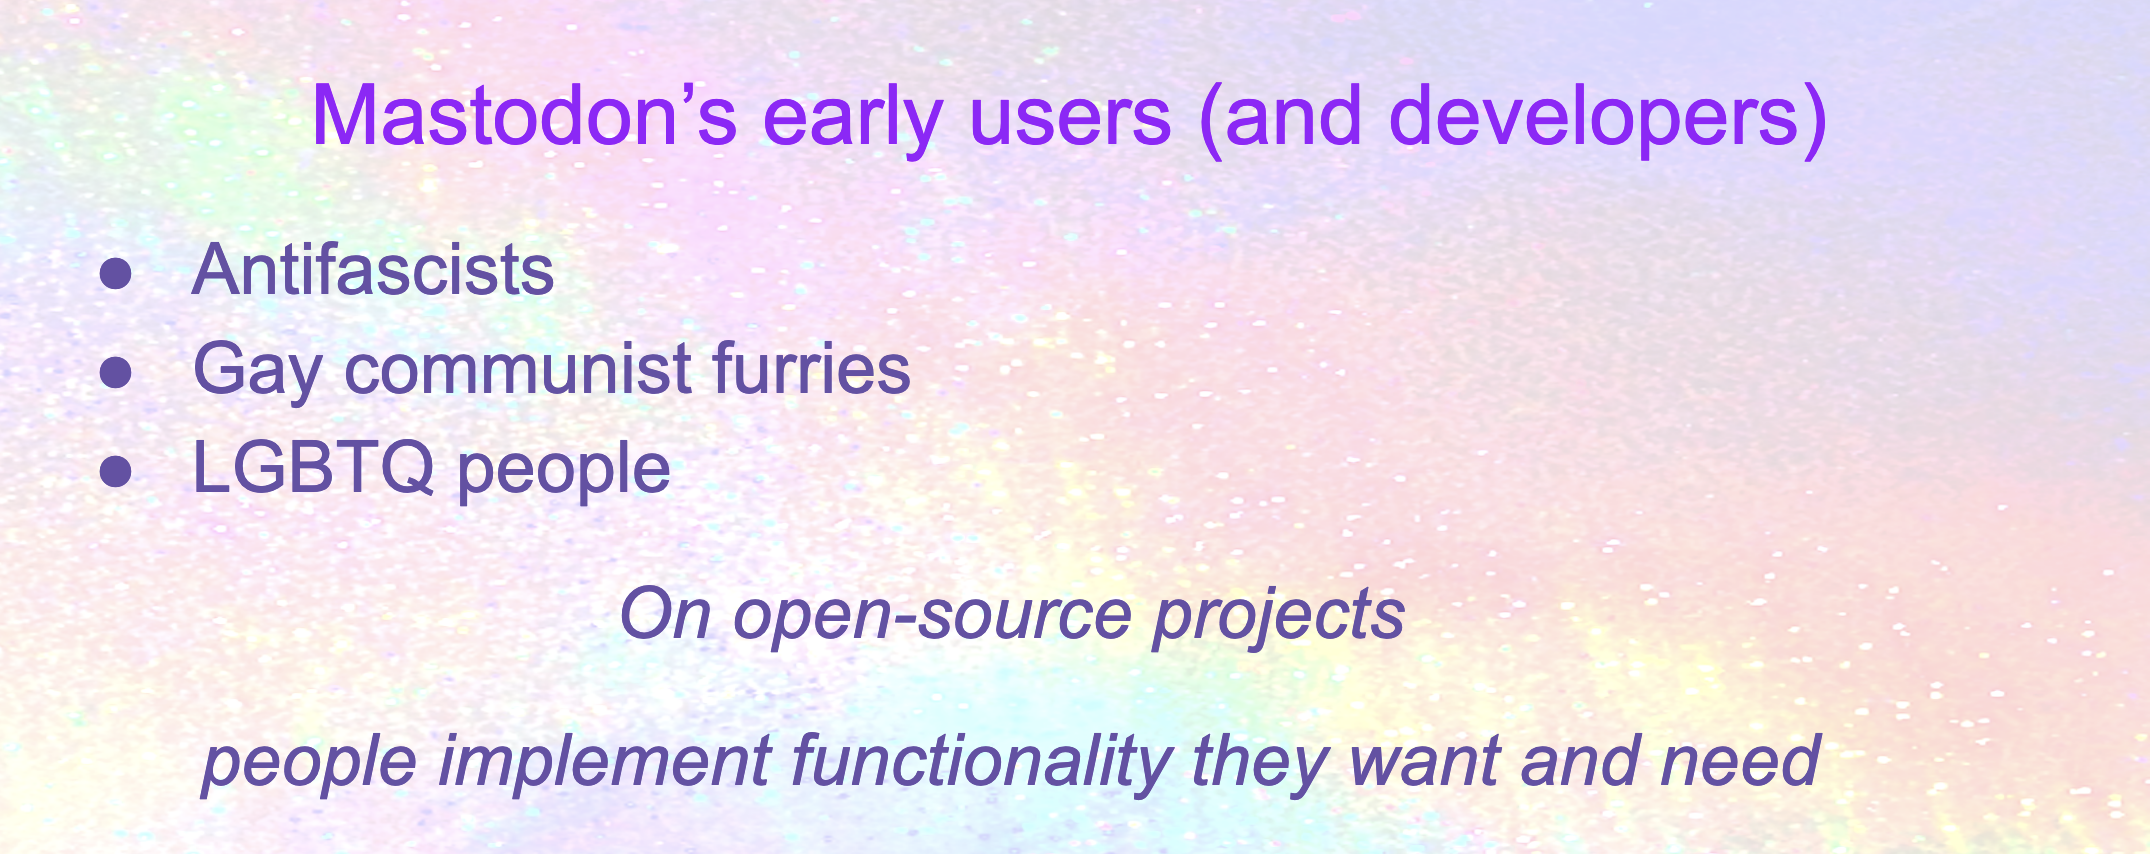 Mastodon’s early users (and developers): Antifascists, Gay communist furries, LGBTQ people. On open-source projects  people implement functionality they want and need